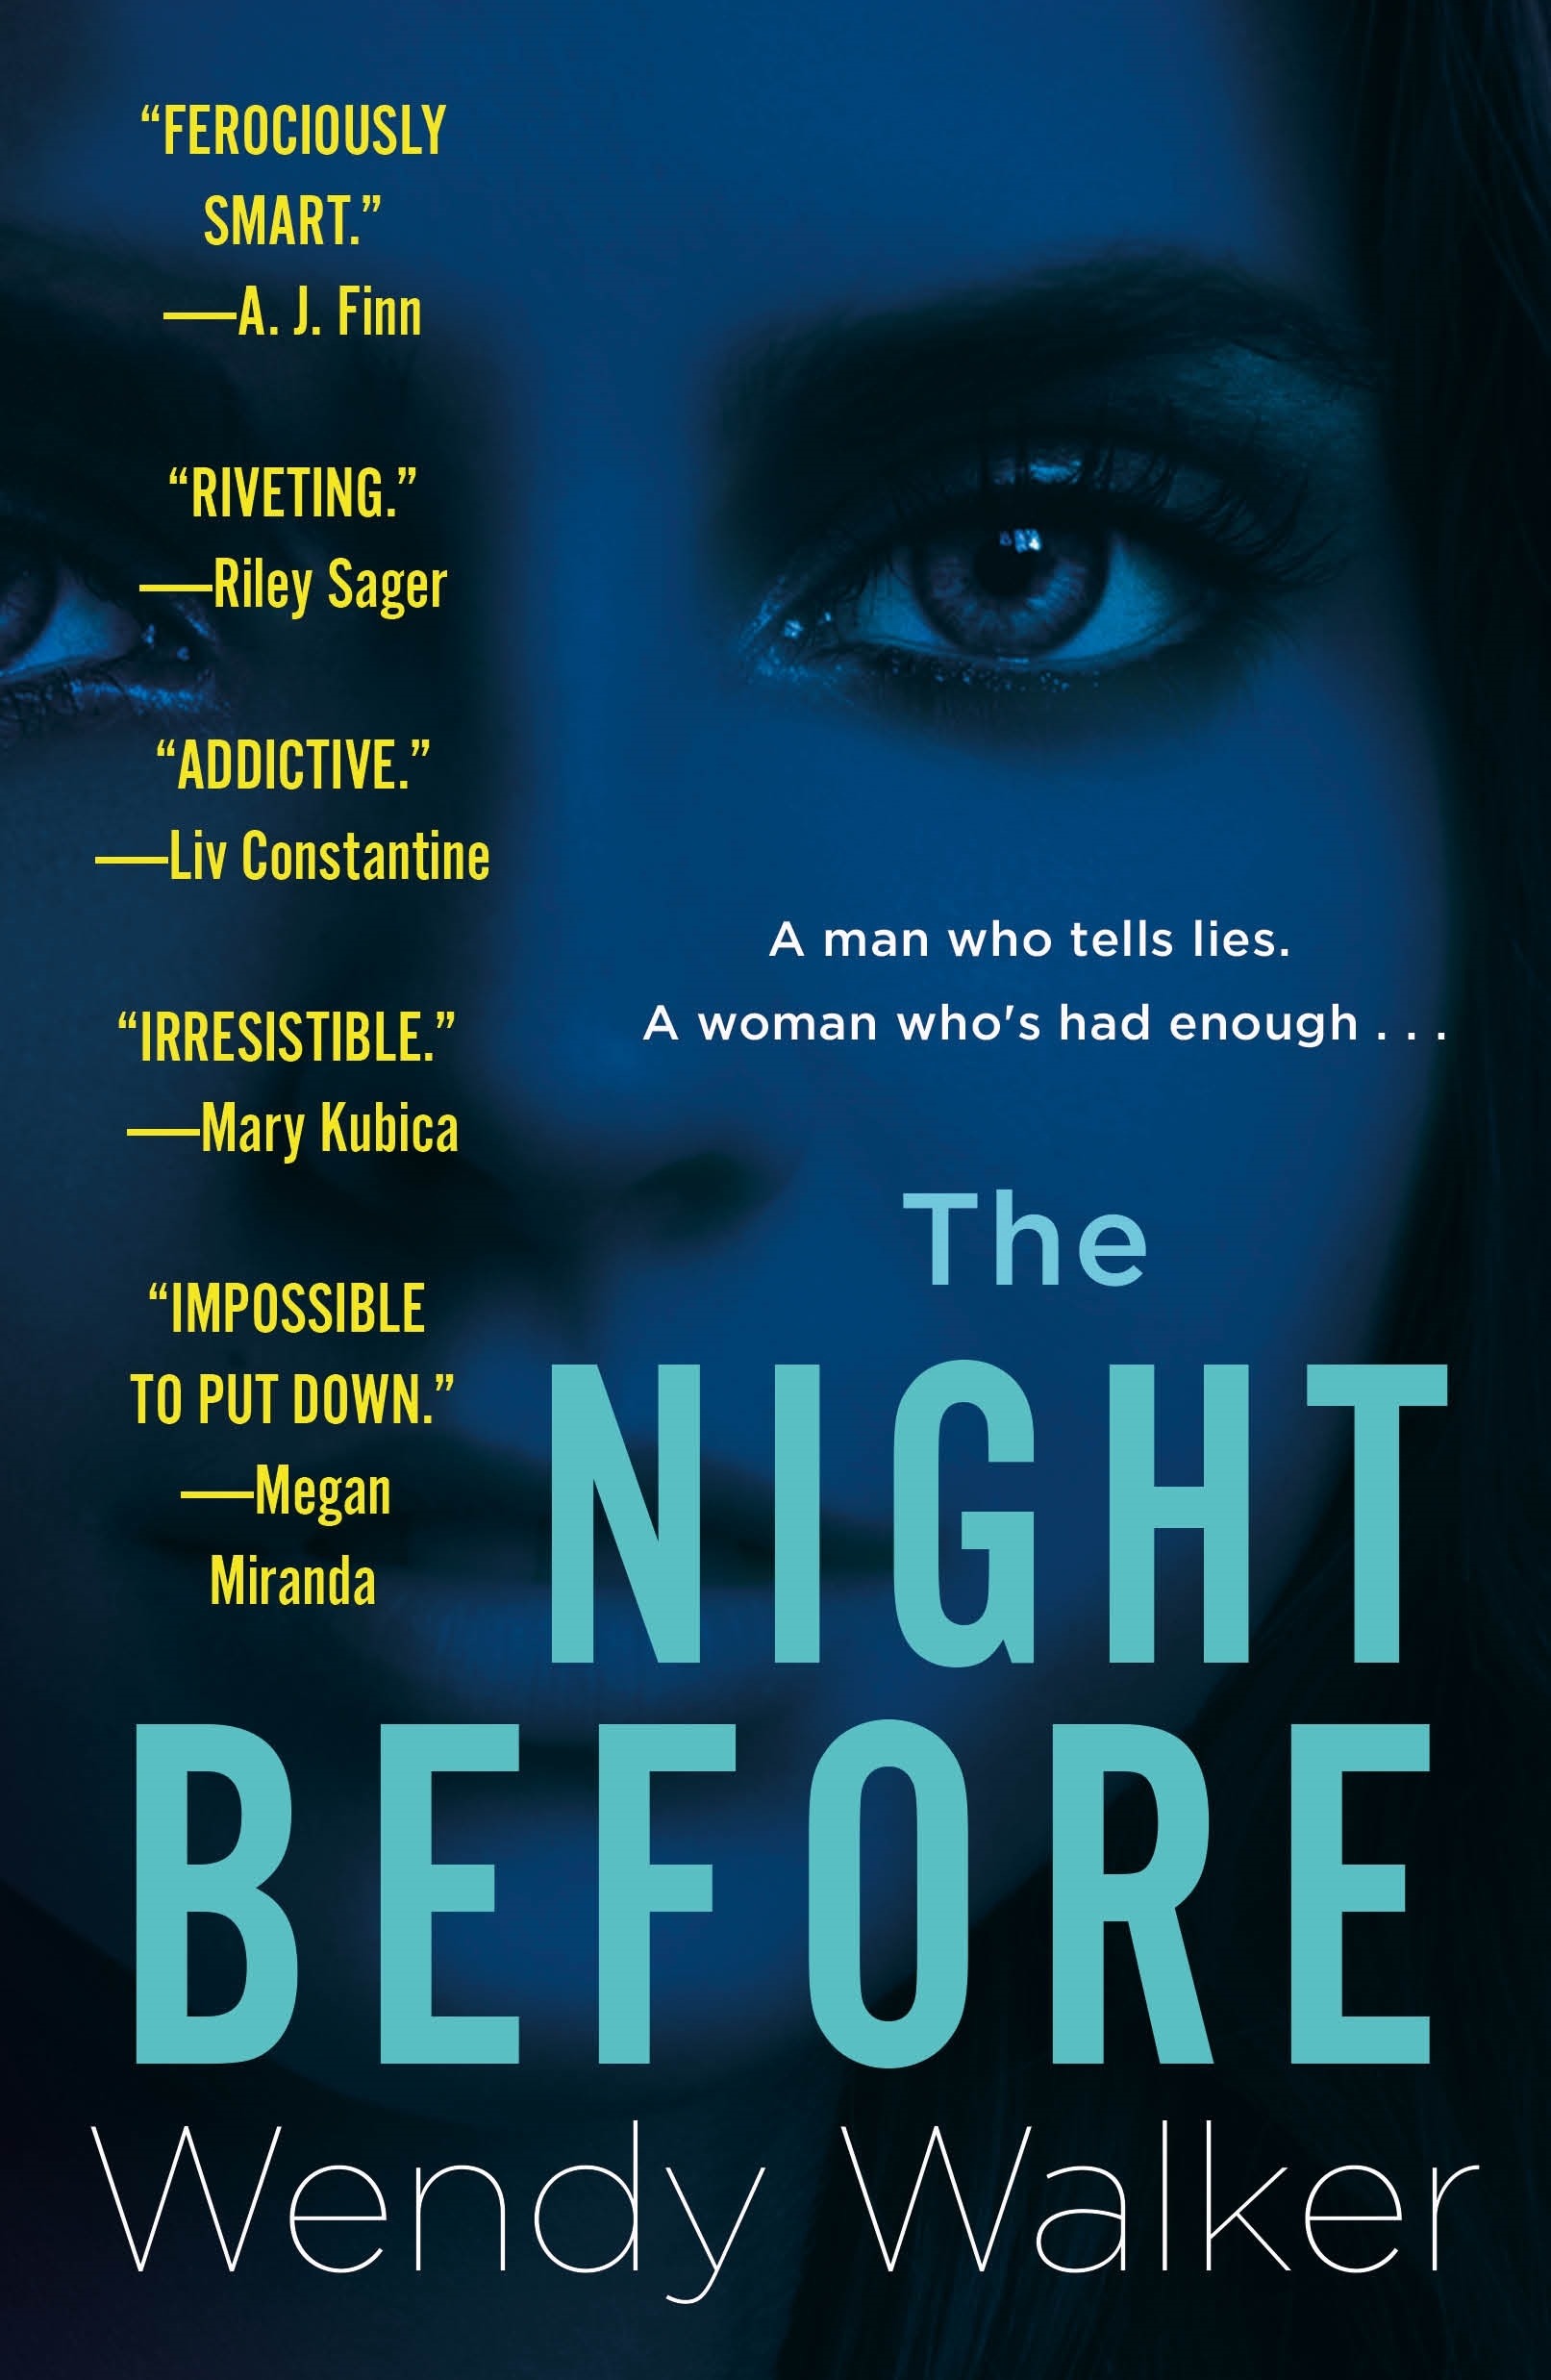 Book “The Night Before” by Wendy Walker — April 28, 2020